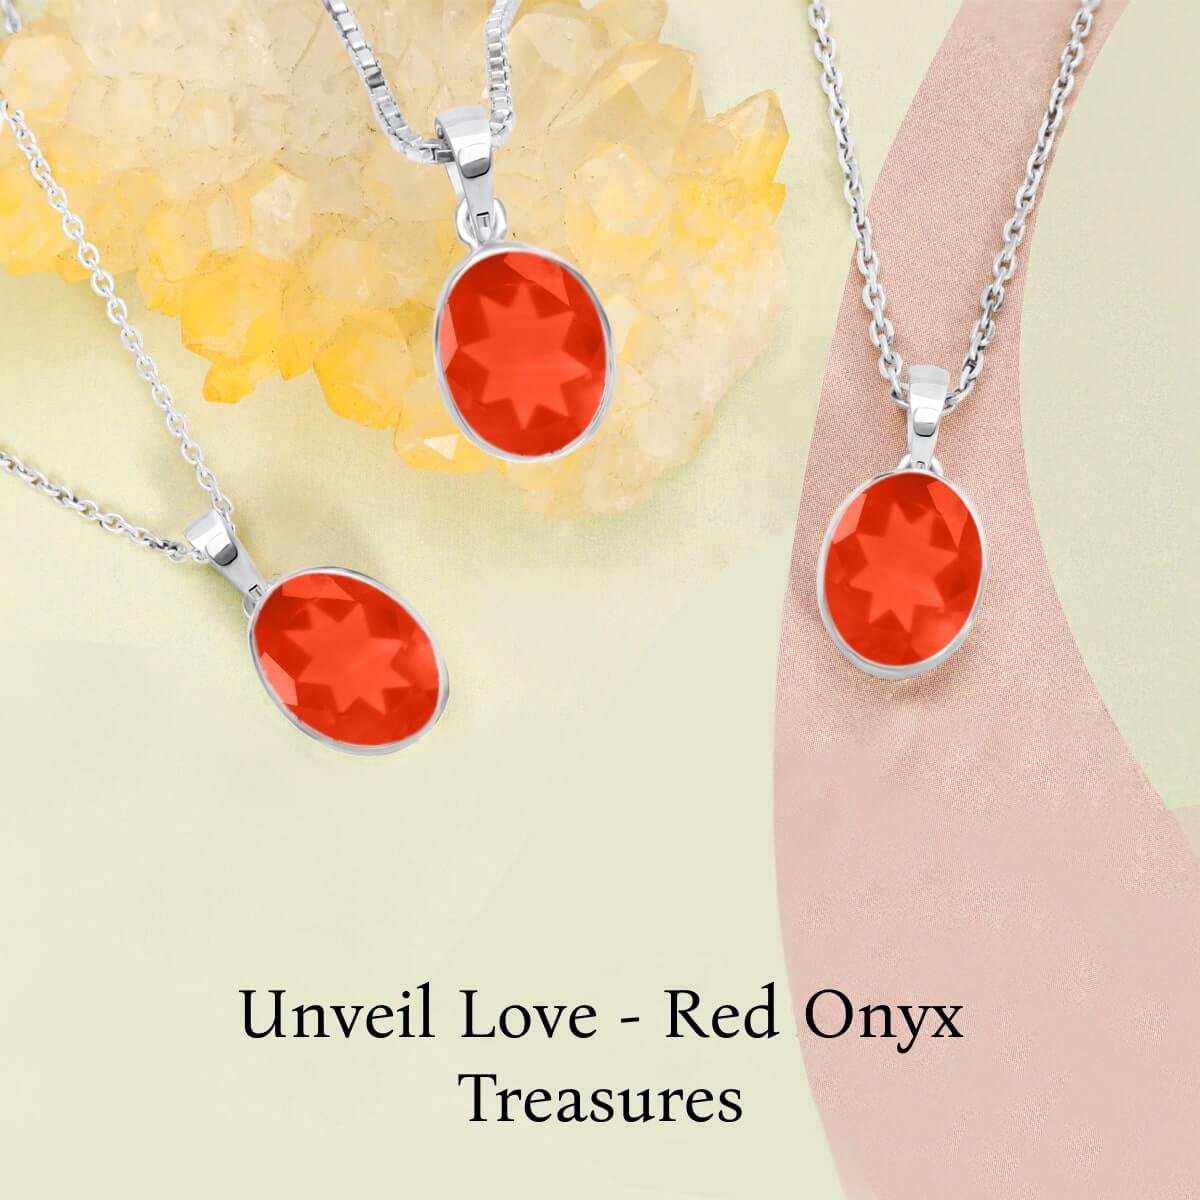 Red Onyx Jewelry: An Astonishing Gift For Your Loved Ones